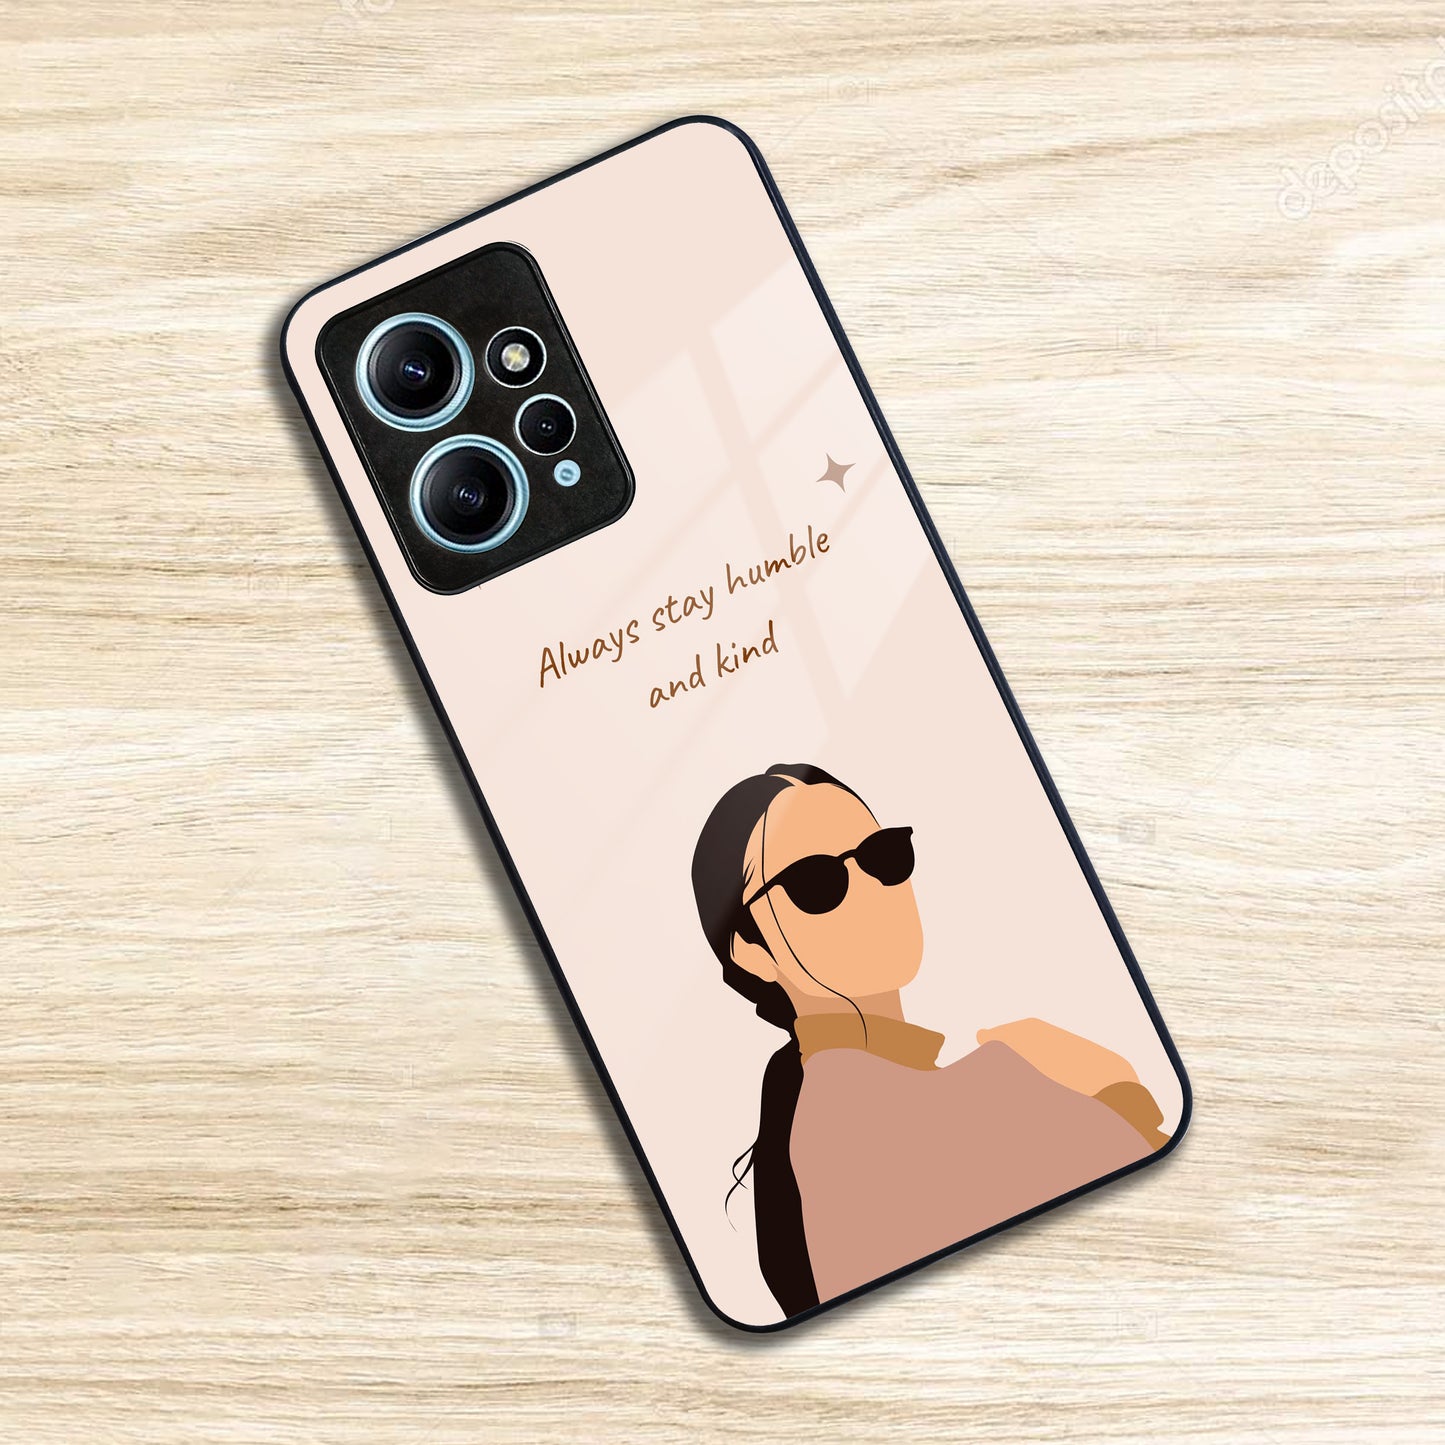 Always Stay Humble And Kind Glass Phone Cover for Redmi/Xiaomi